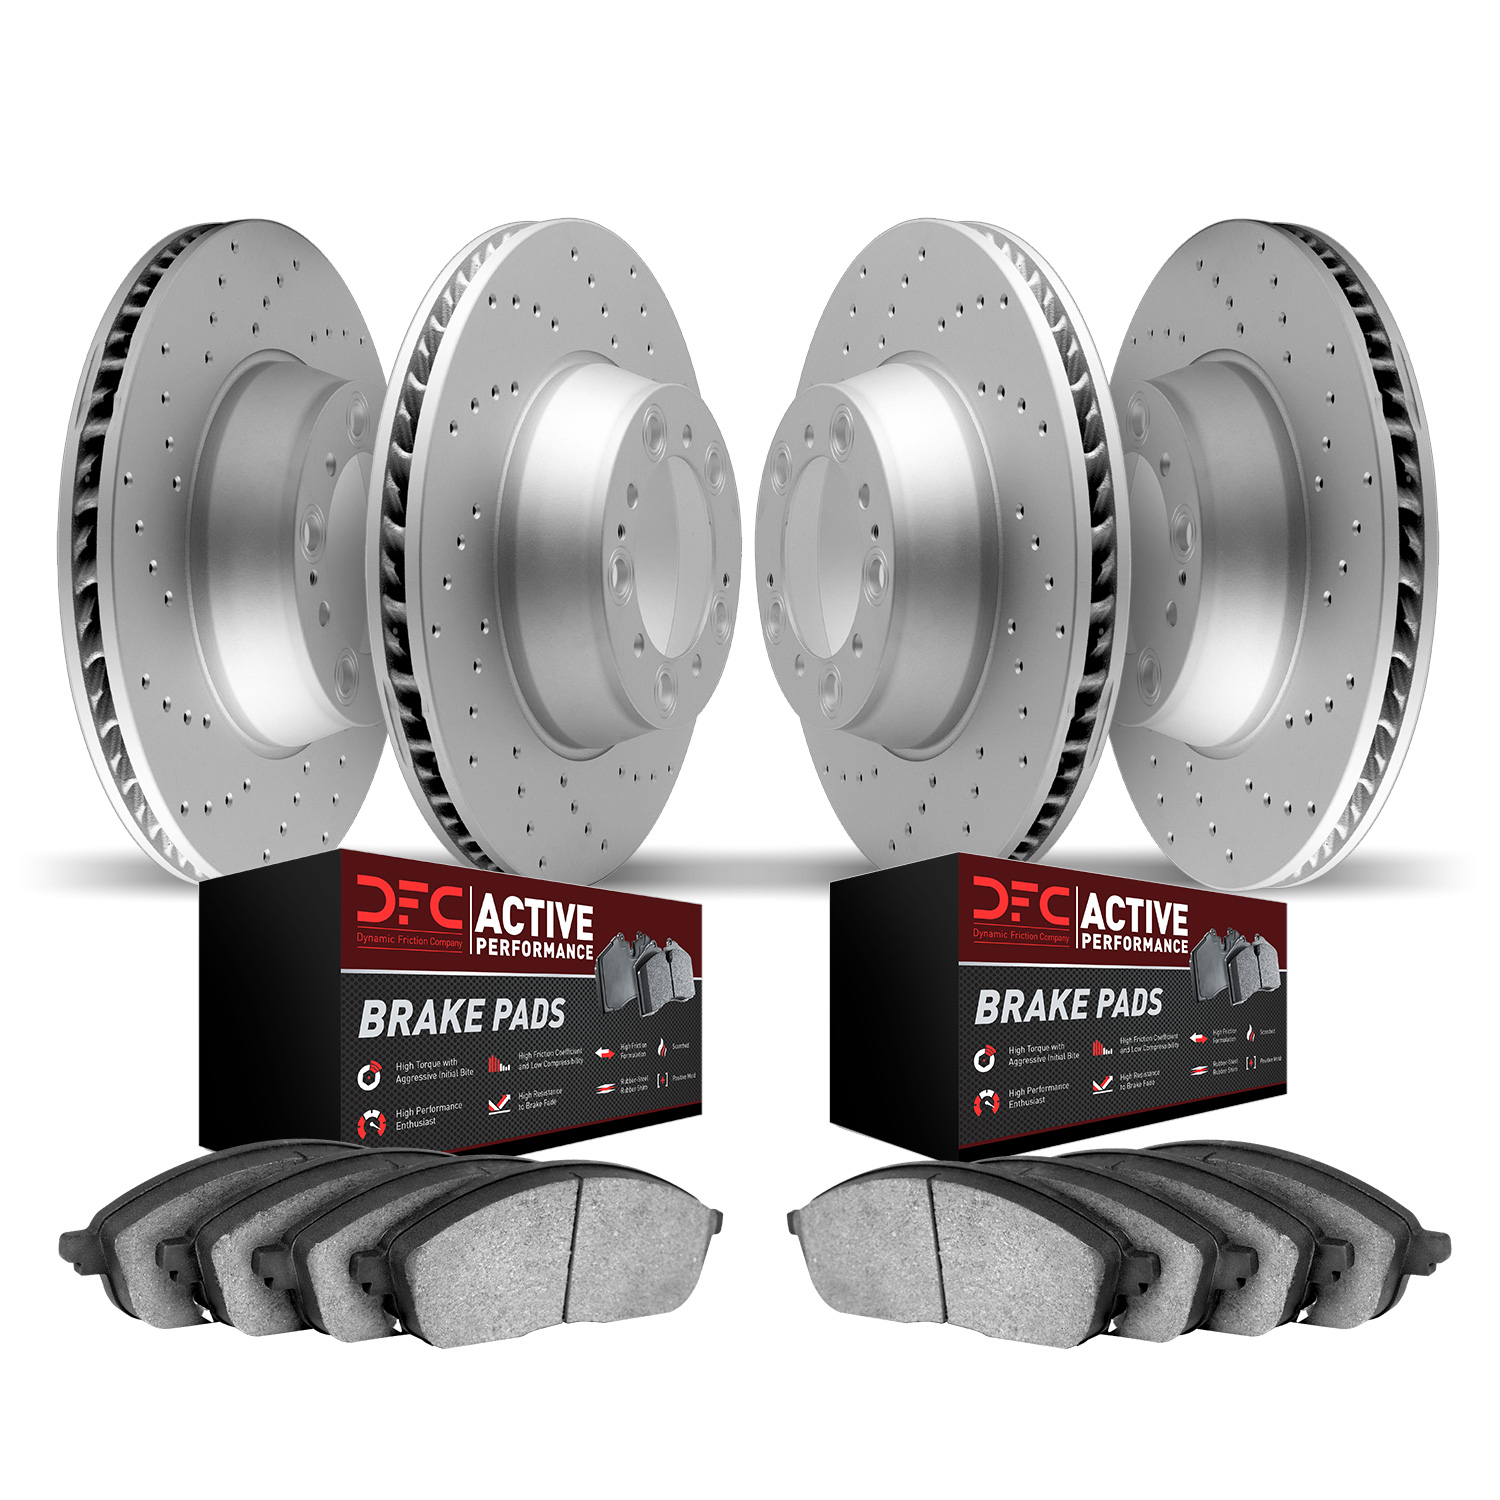 2704-68006 Geoperformance Drilled Brake Rotors with Active Performance Pads Kit, 2008-2020 Infiniti/Nissan, Position: Front and